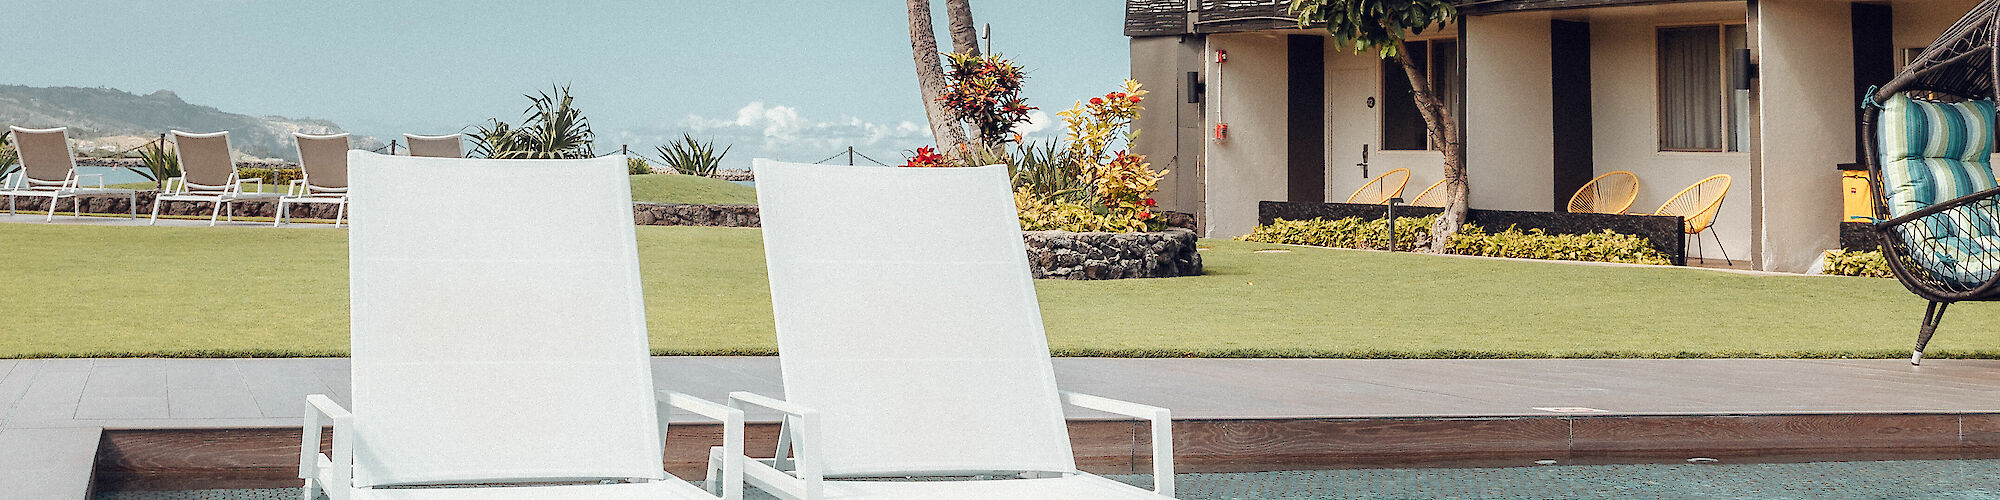 The image shows two white lounge chairs by a pool, with a building and palm trees in the background, under a clear sky.